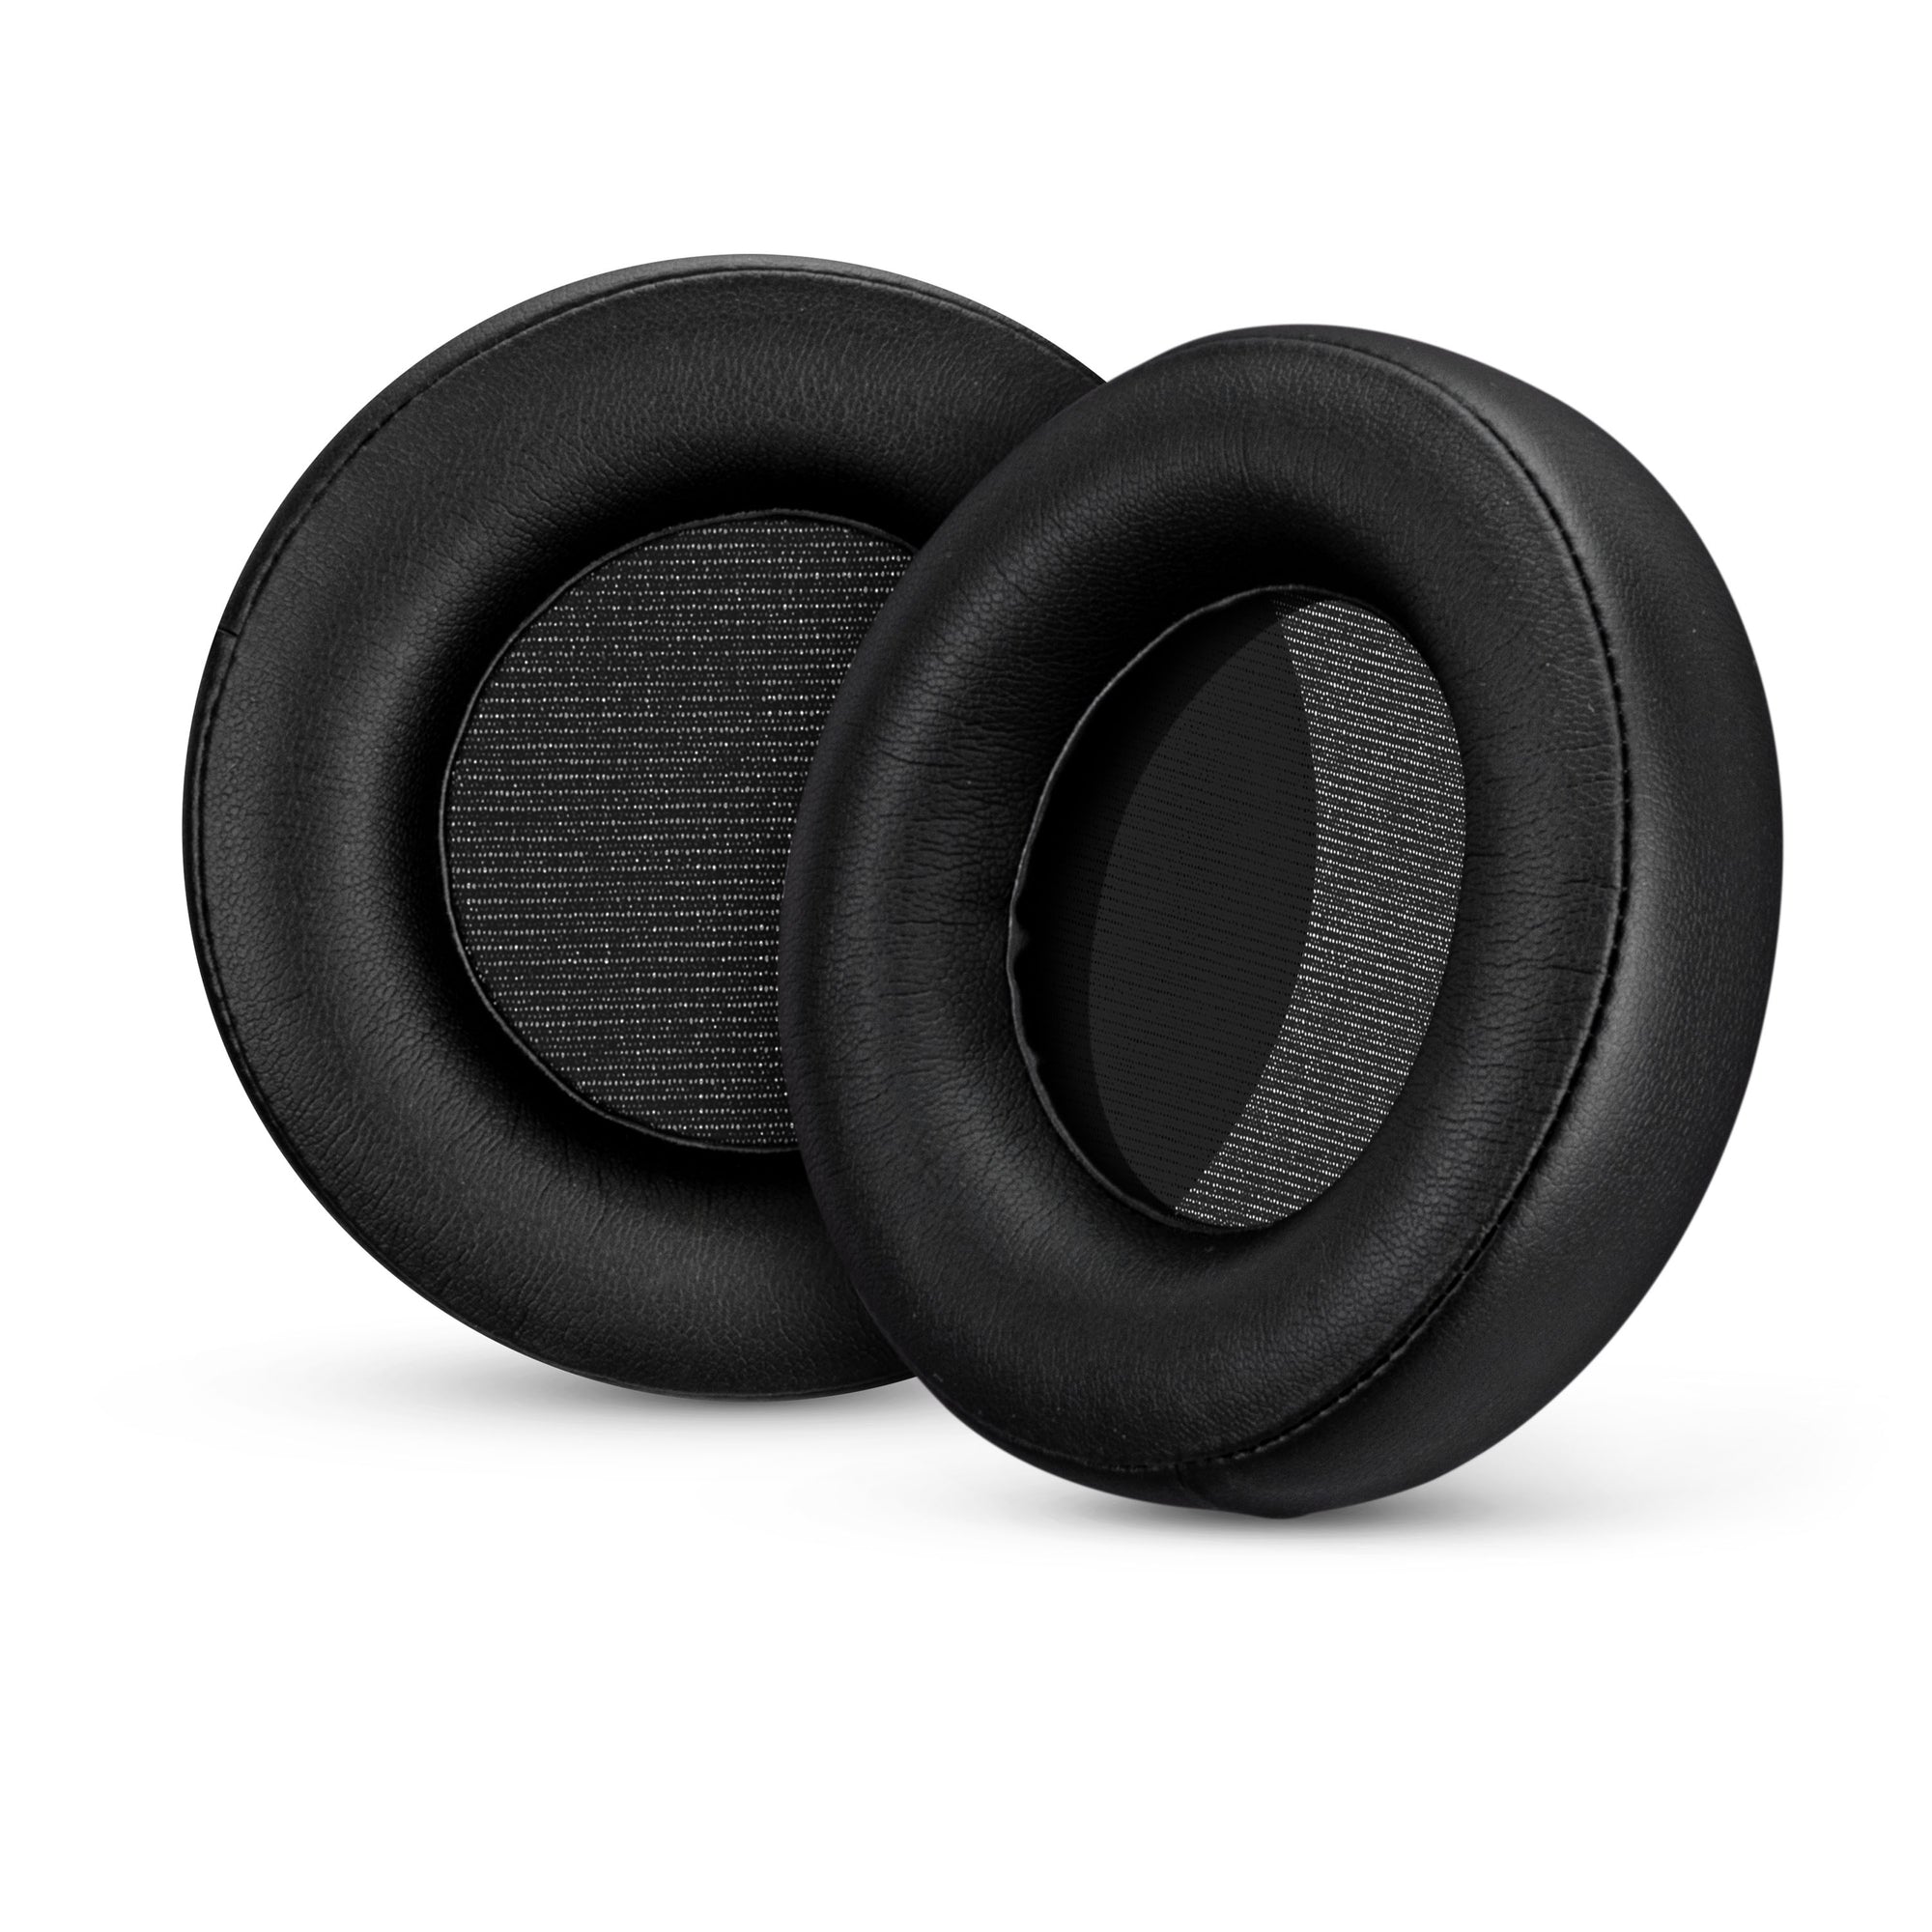 Replacement Earpads for Corsair Virtuoso RGB Gaming Headset, Soft PU Leather & Extra Comfort